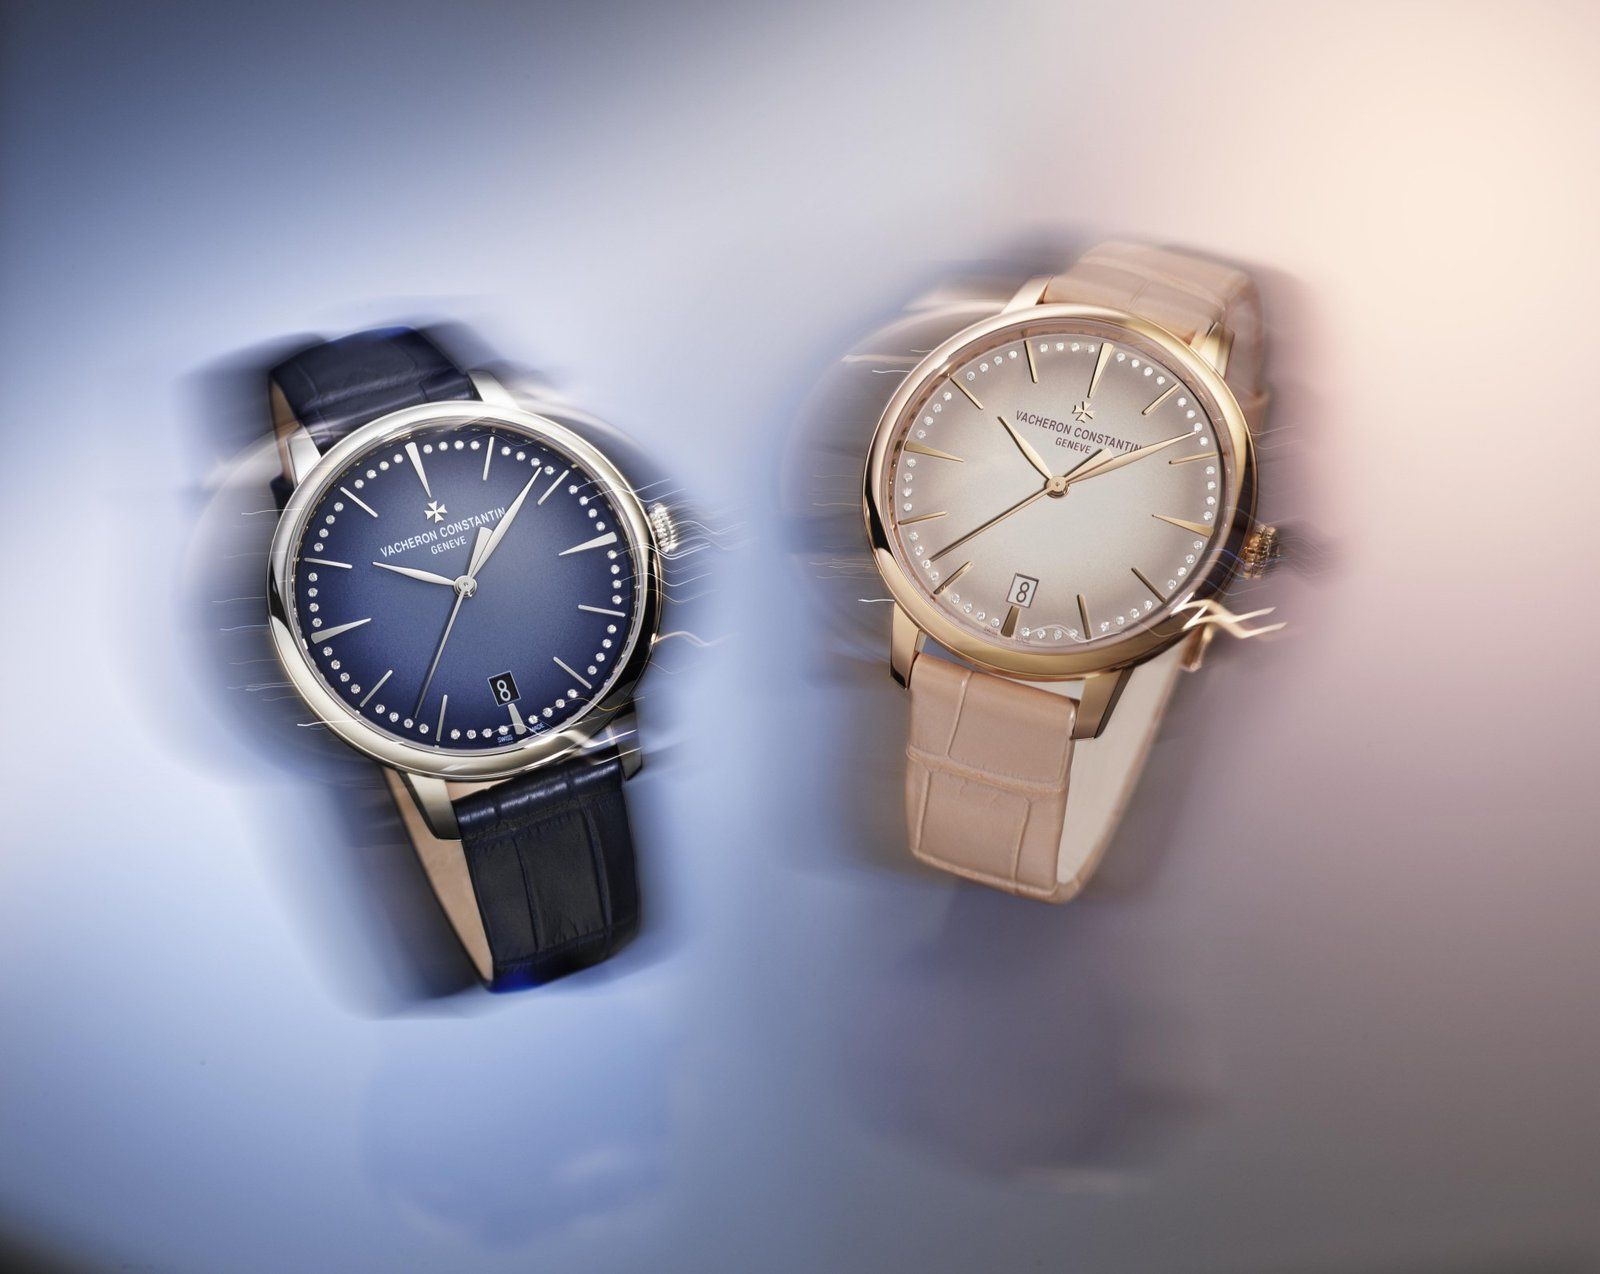 Patrimony self-winding timepieces with gradient dials in deep blue (left) and blush pink (right)